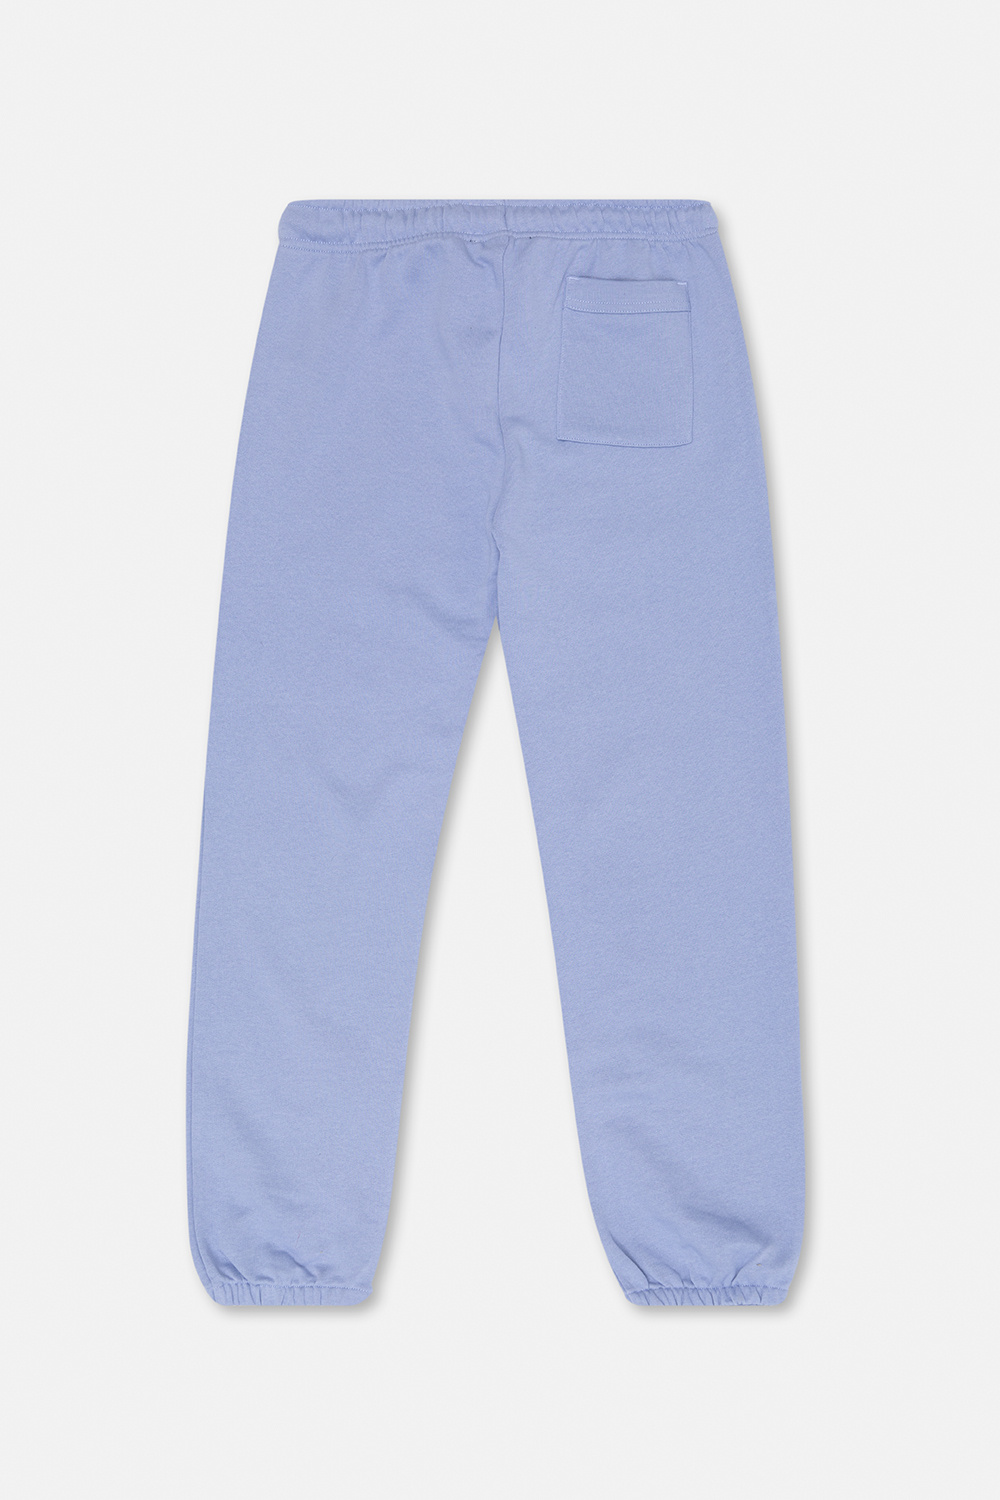 Acne Studios Kids bear-embroidered track pants